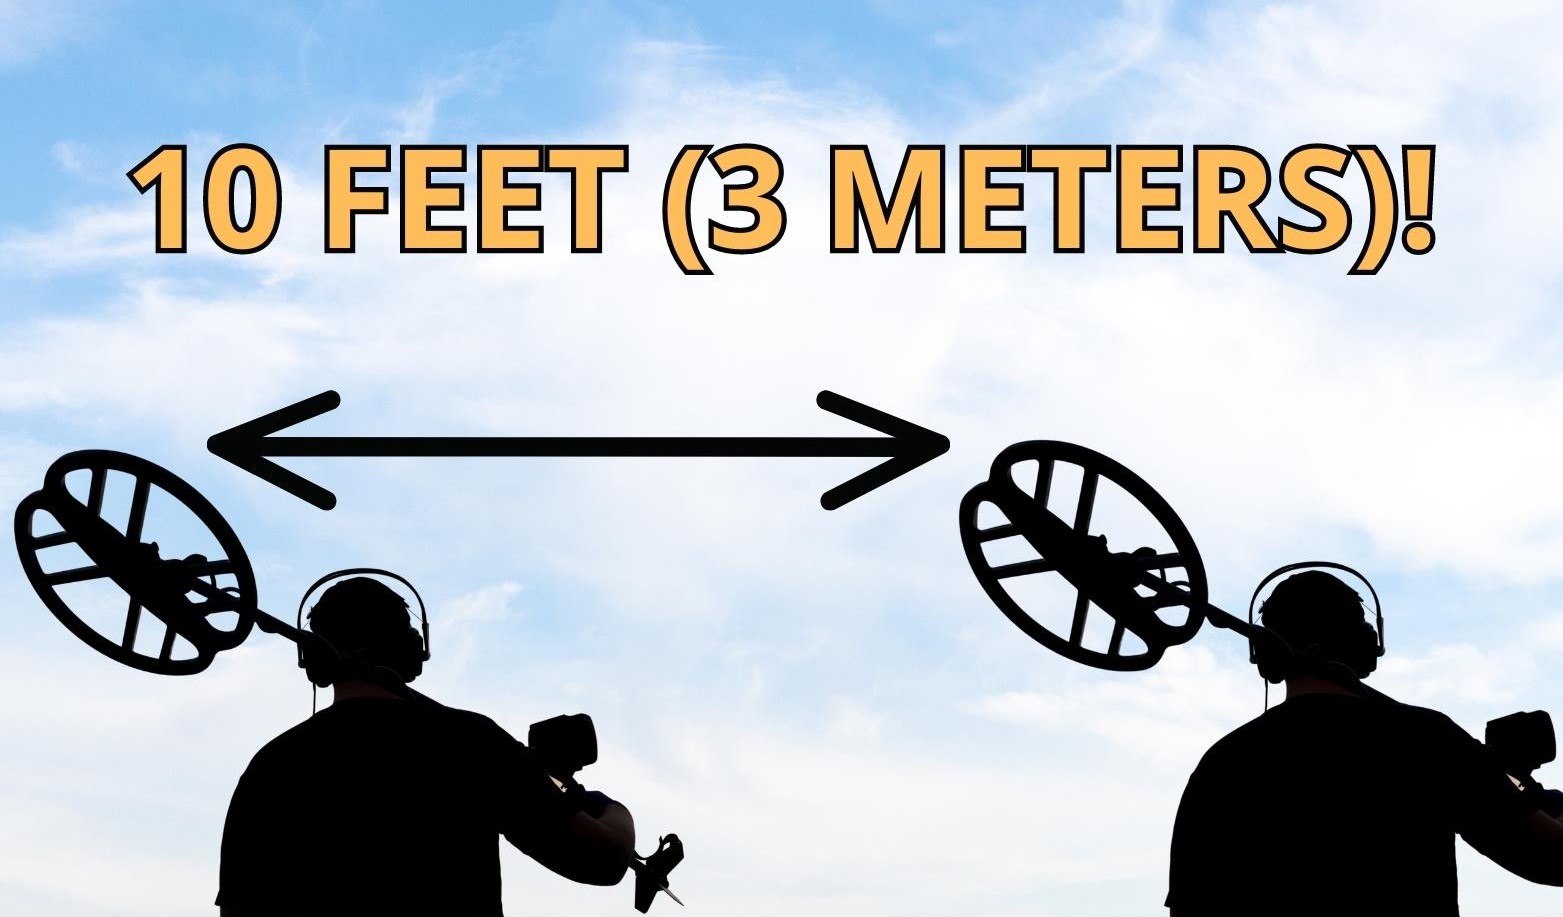 The minimum distance between two detectorists. 